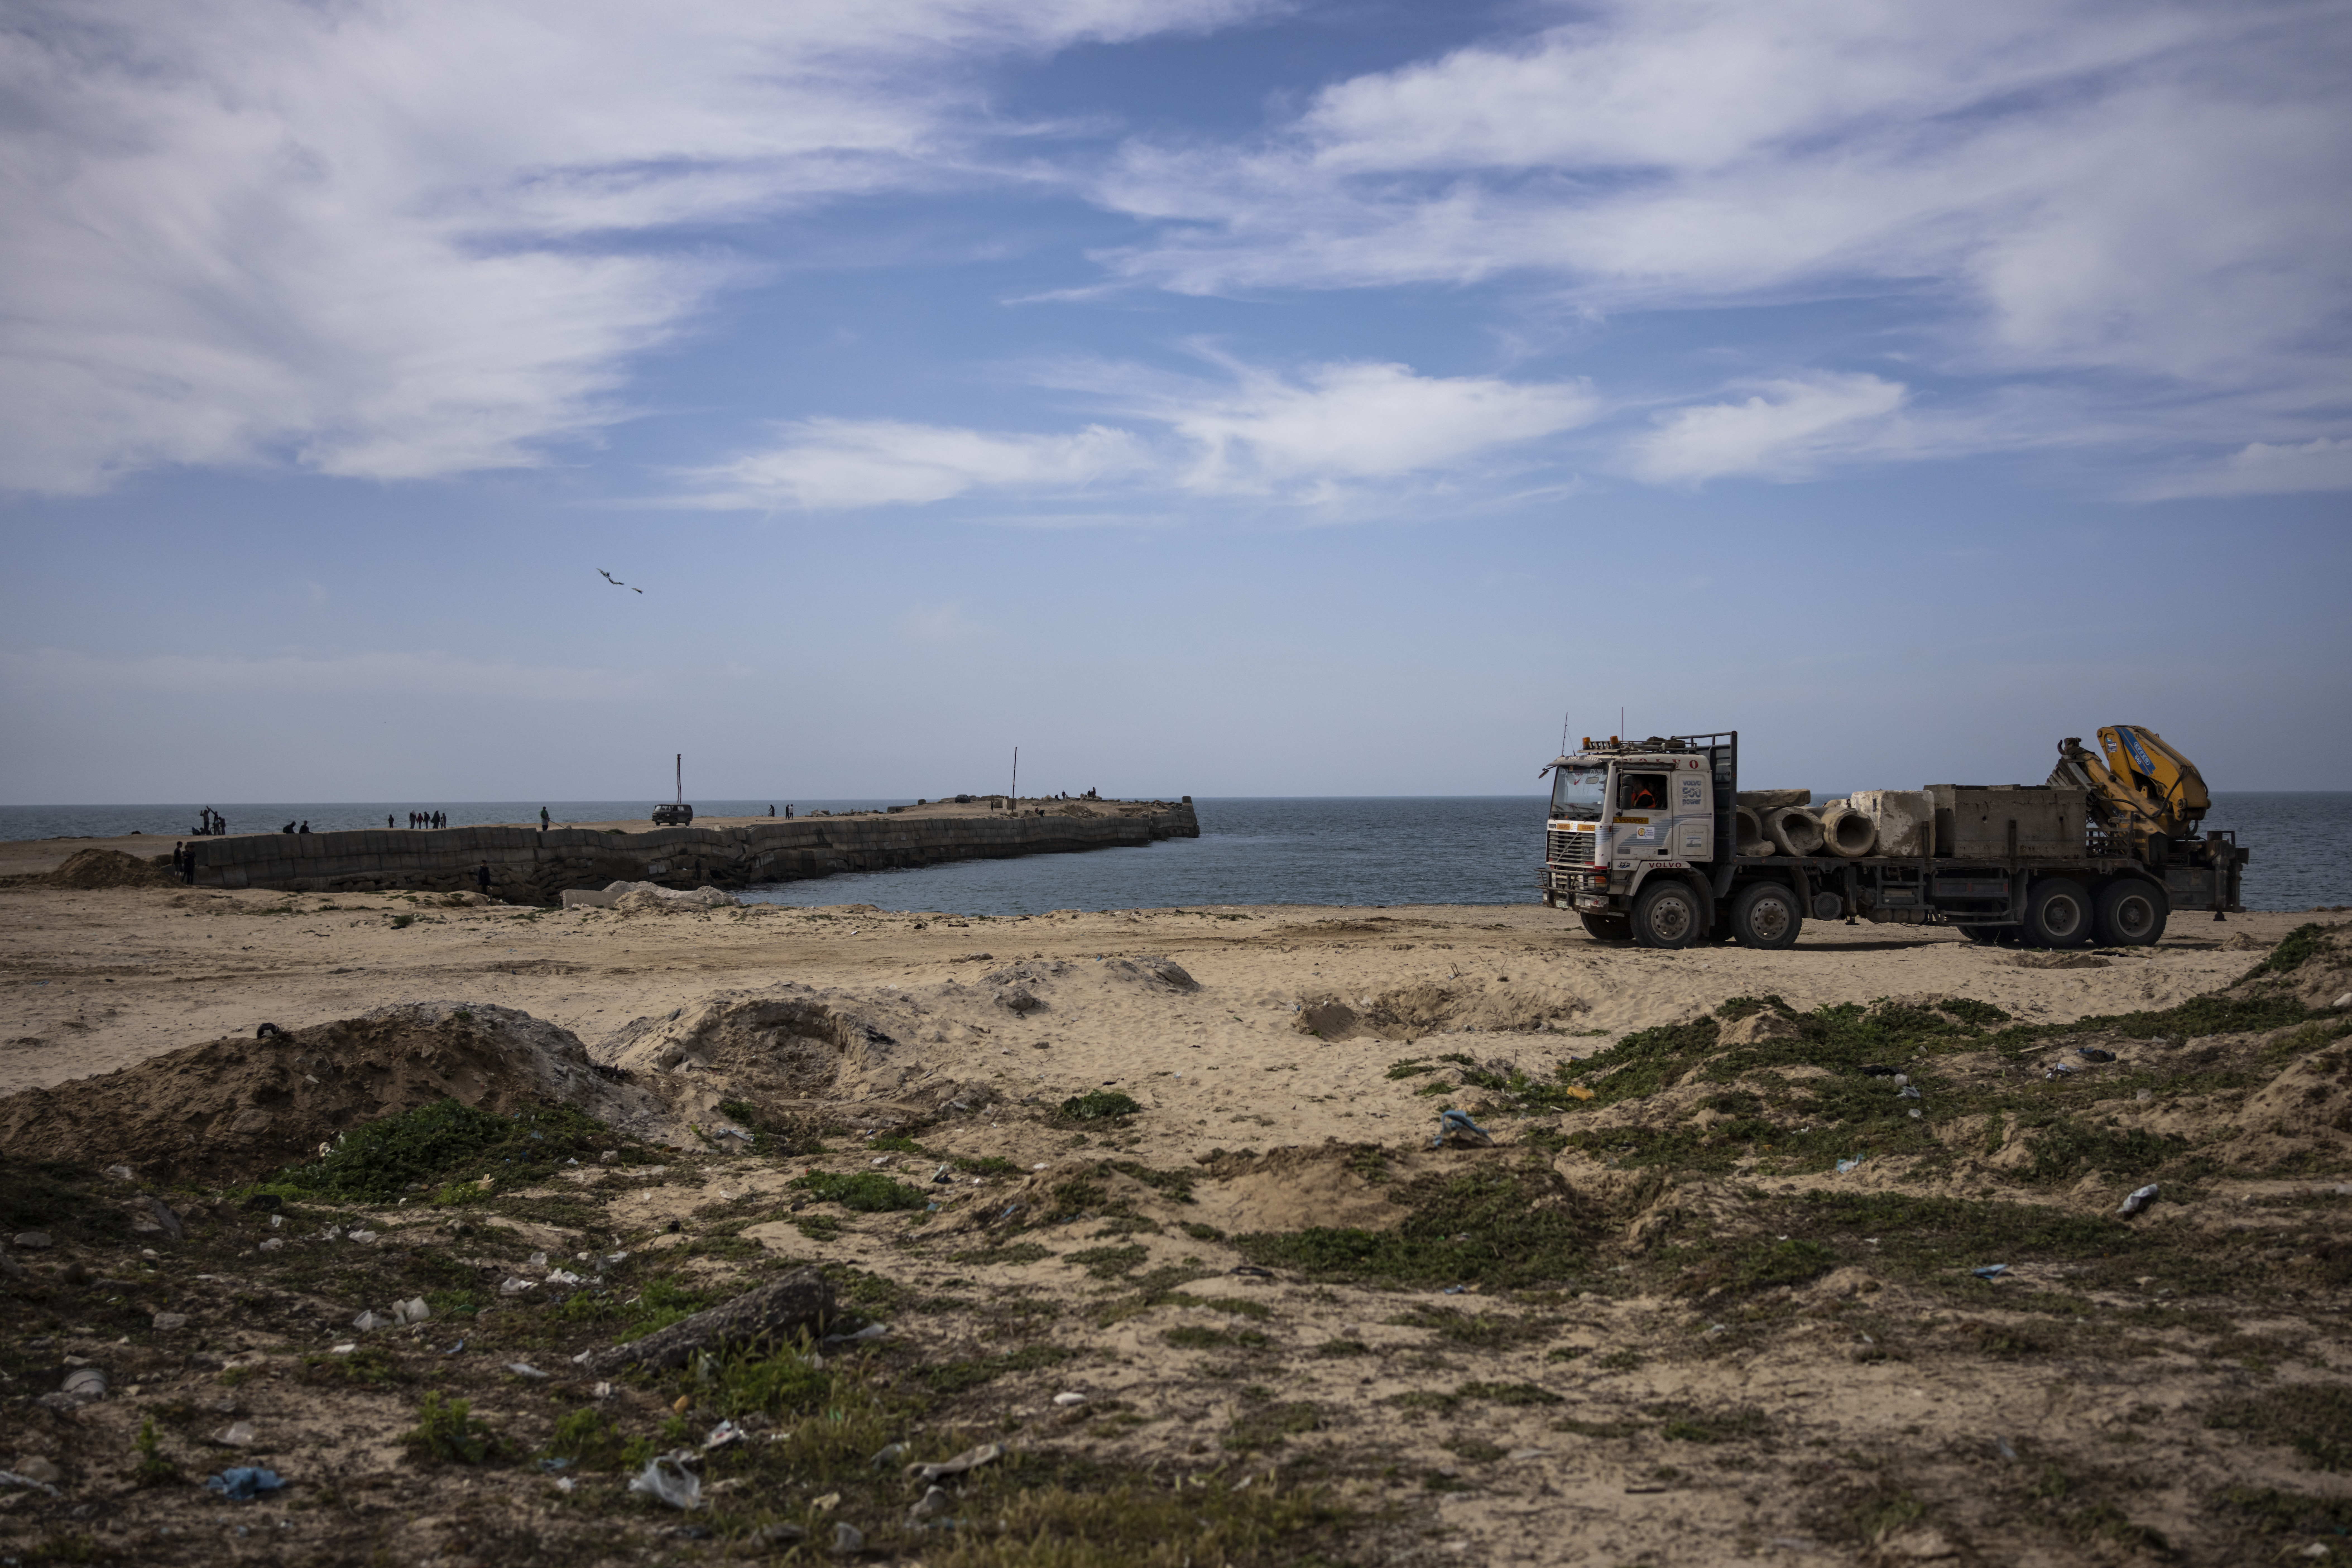 The US military's floating pier off the coast of Gaza came under mortar fire from suspected Hamas militants, jeopardizing plans to provide humanitarian aid.